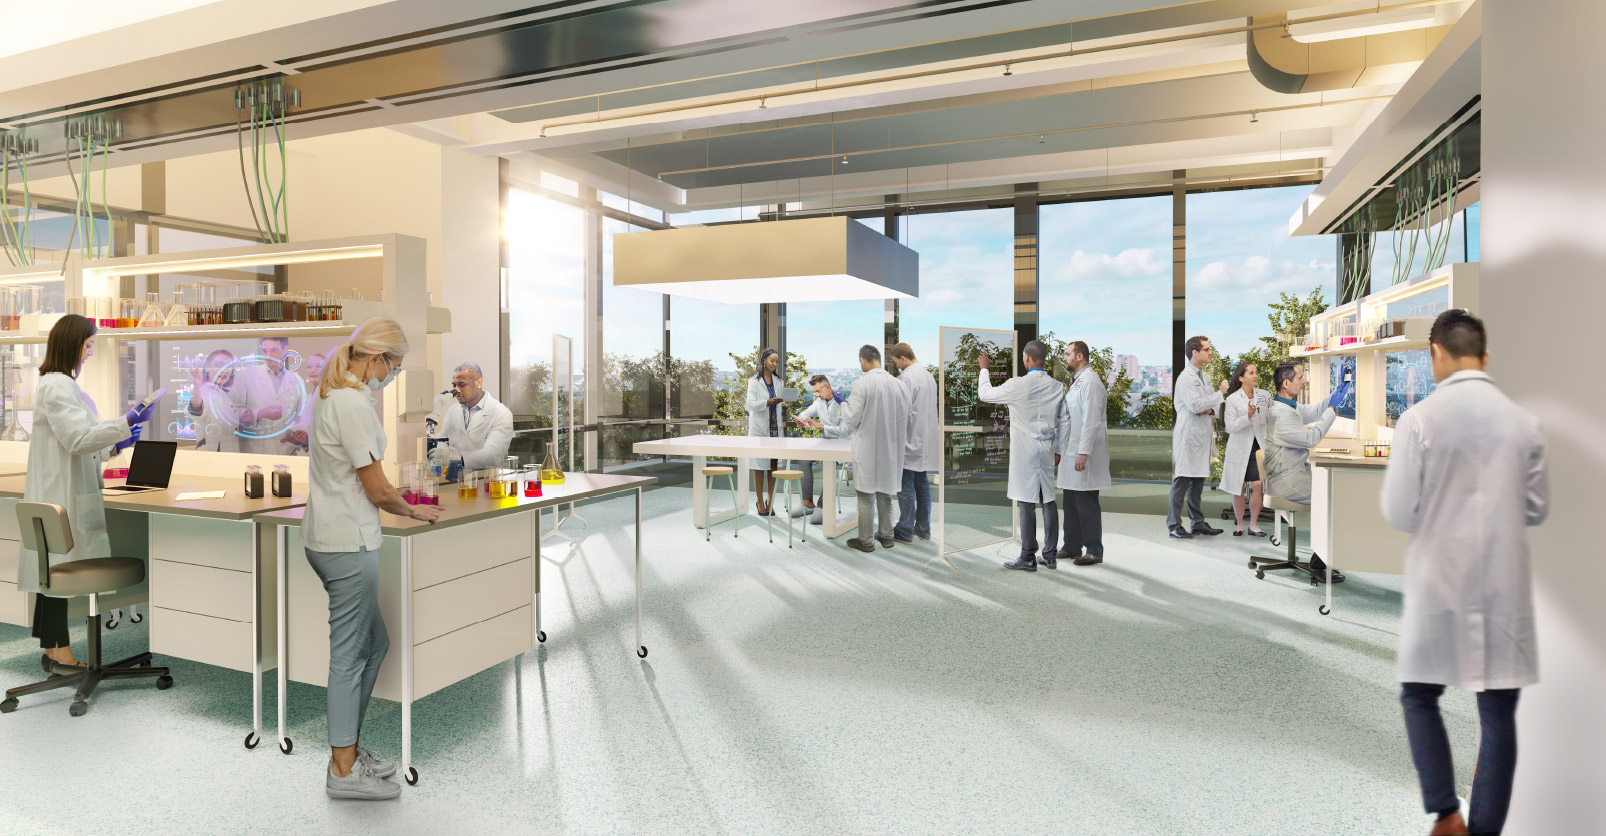 A rendering of a lab at 100 Chestnut featuring large windows and open space